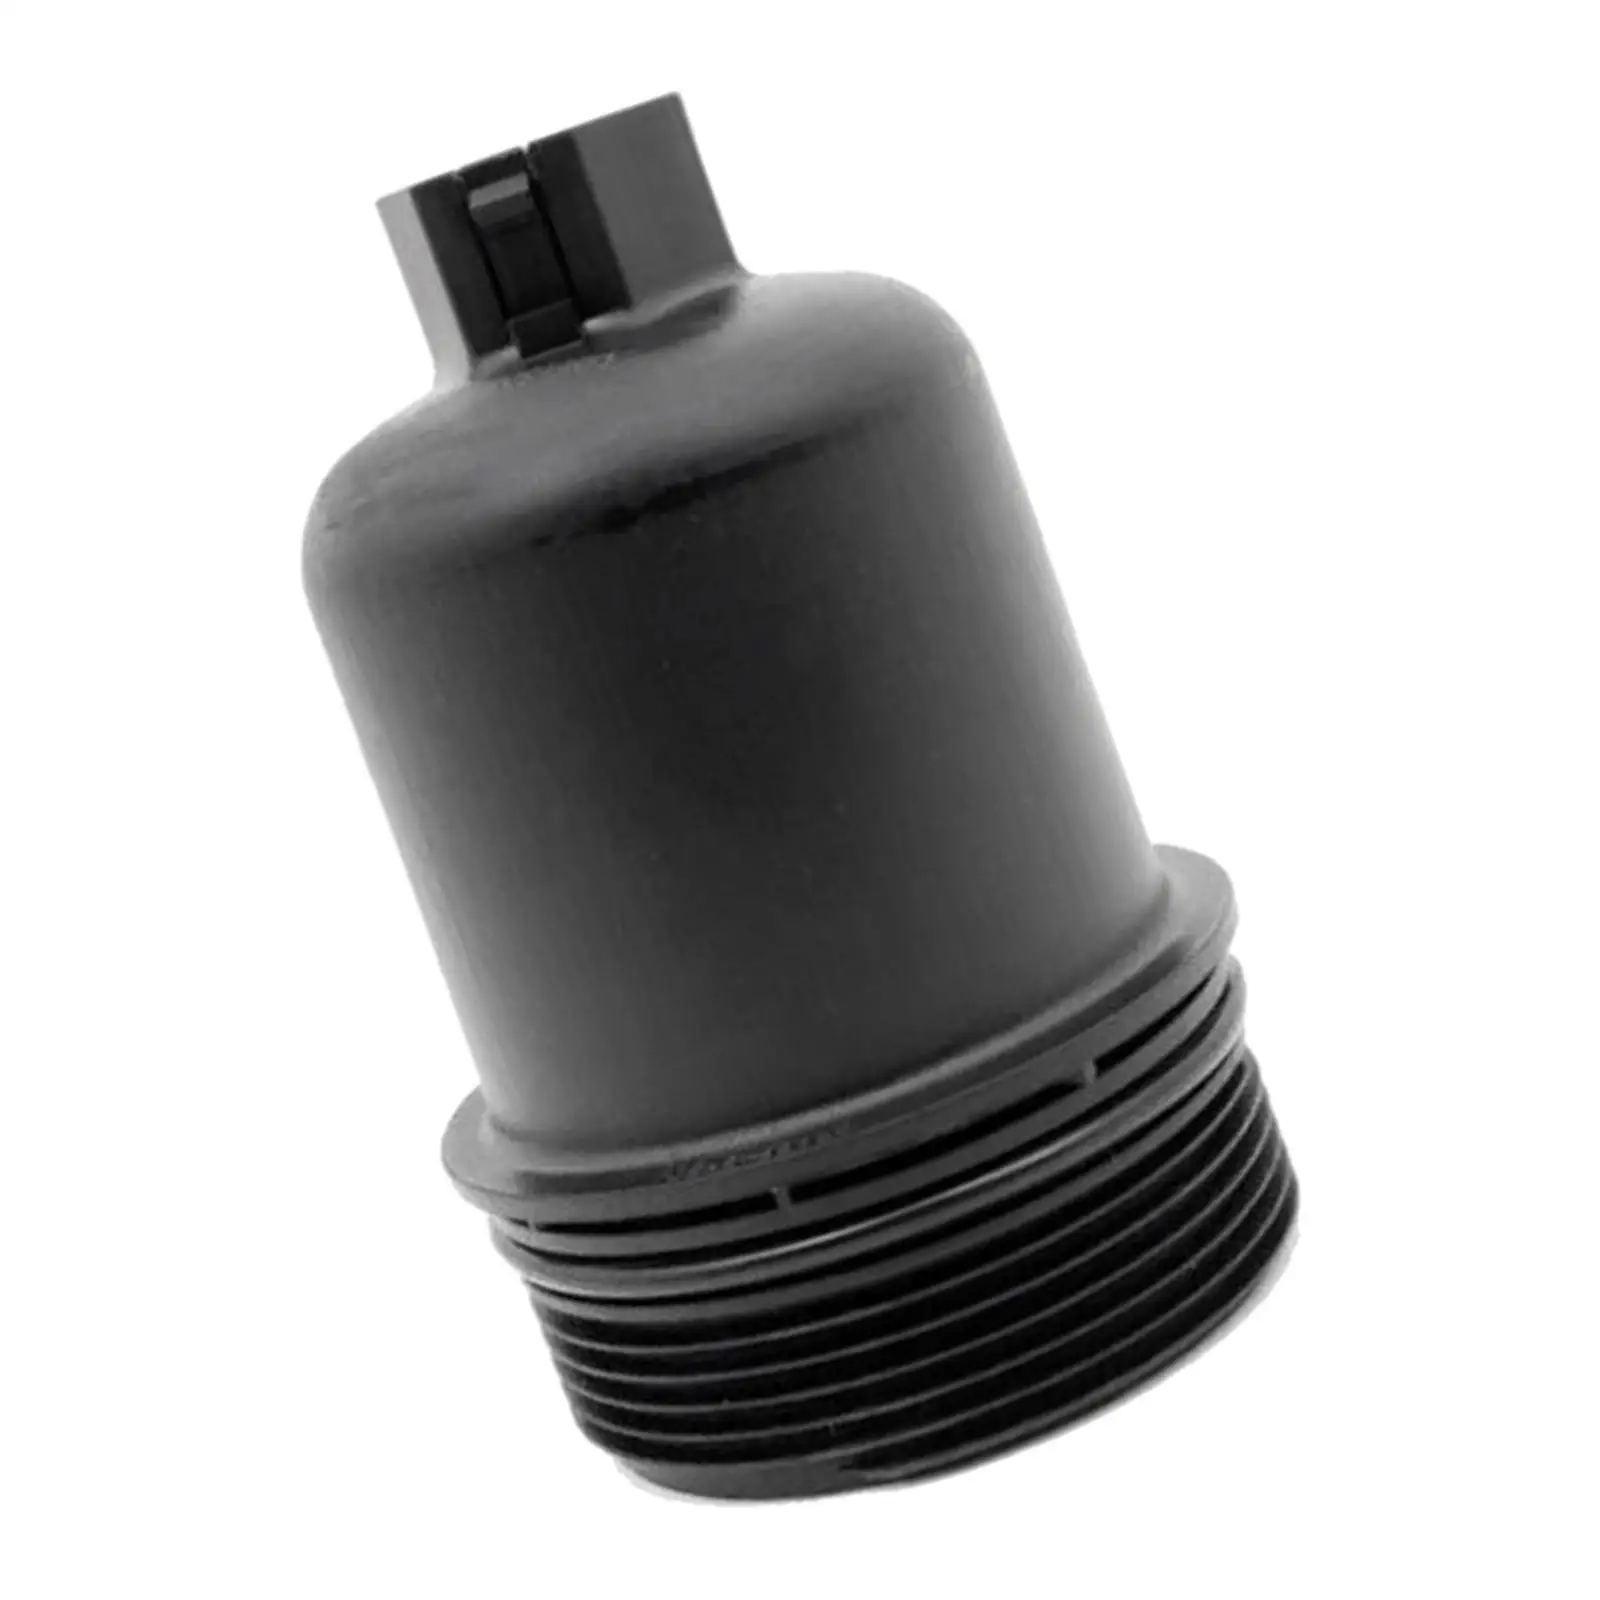 Filters Housing Top Replaces Parts Automotive for 206 307